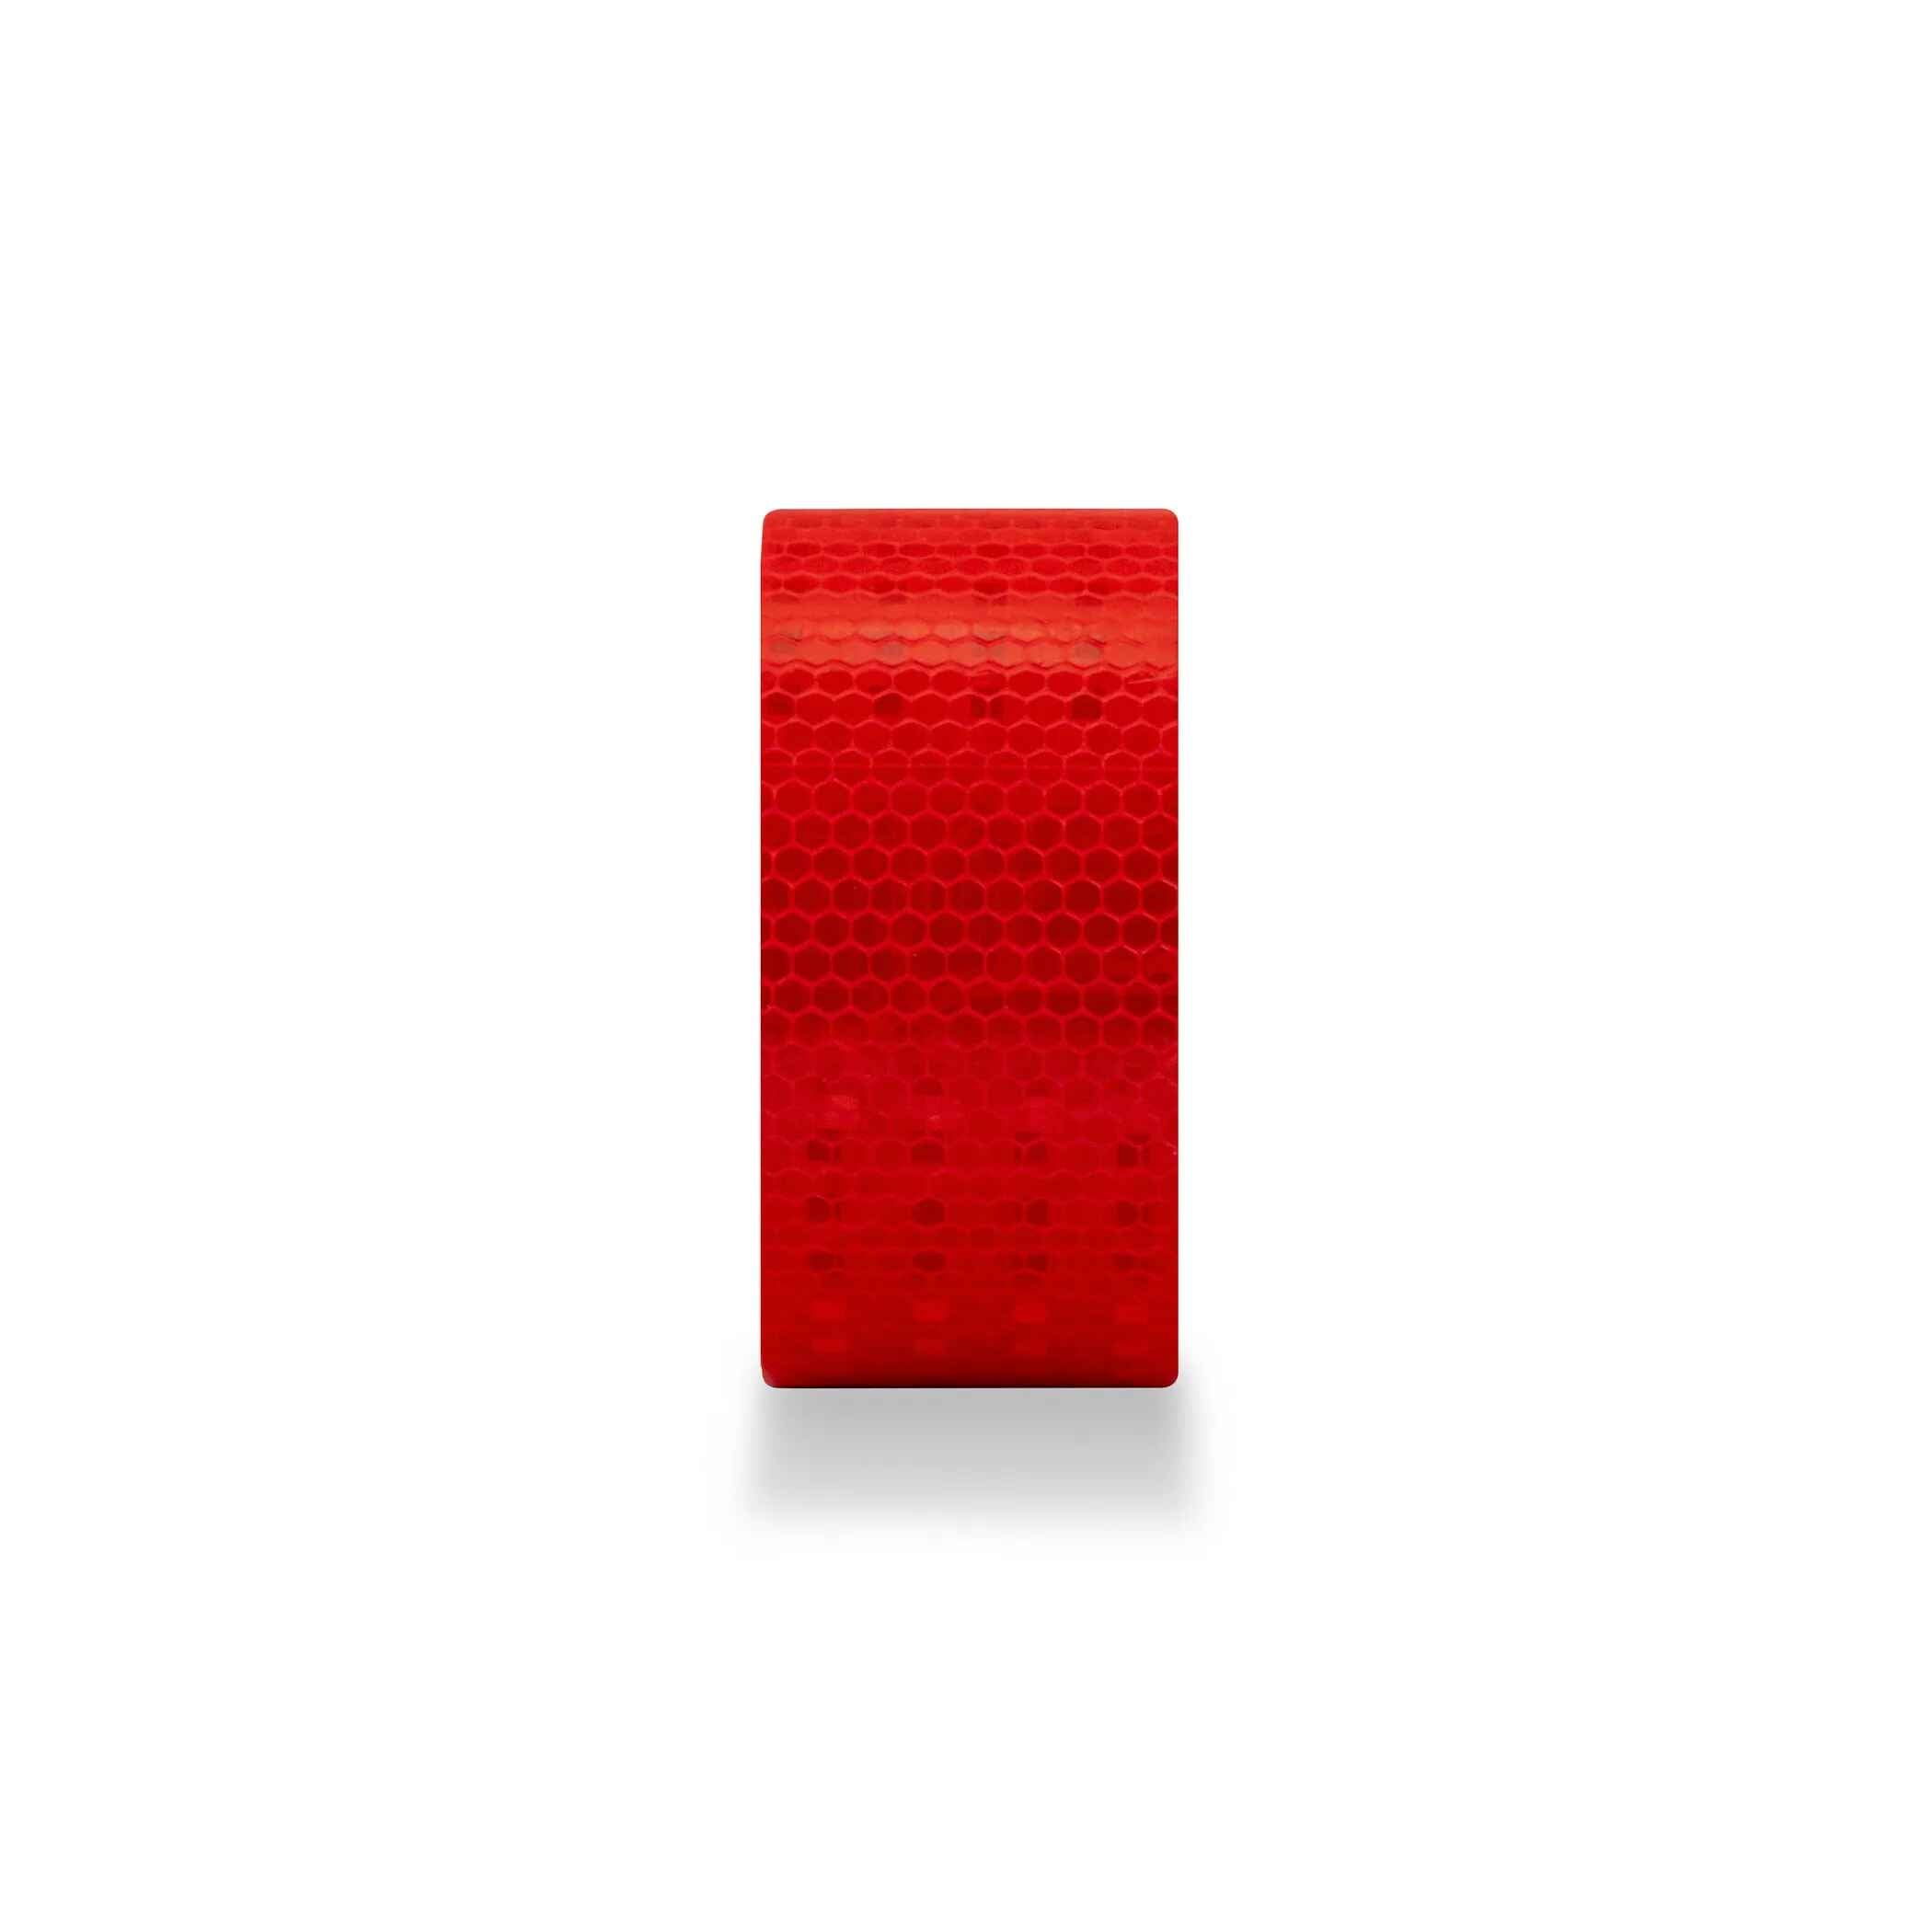 HEXFLECTIVE™ Reflective Tape. 2x 30'. Red Honeycomb Pattern